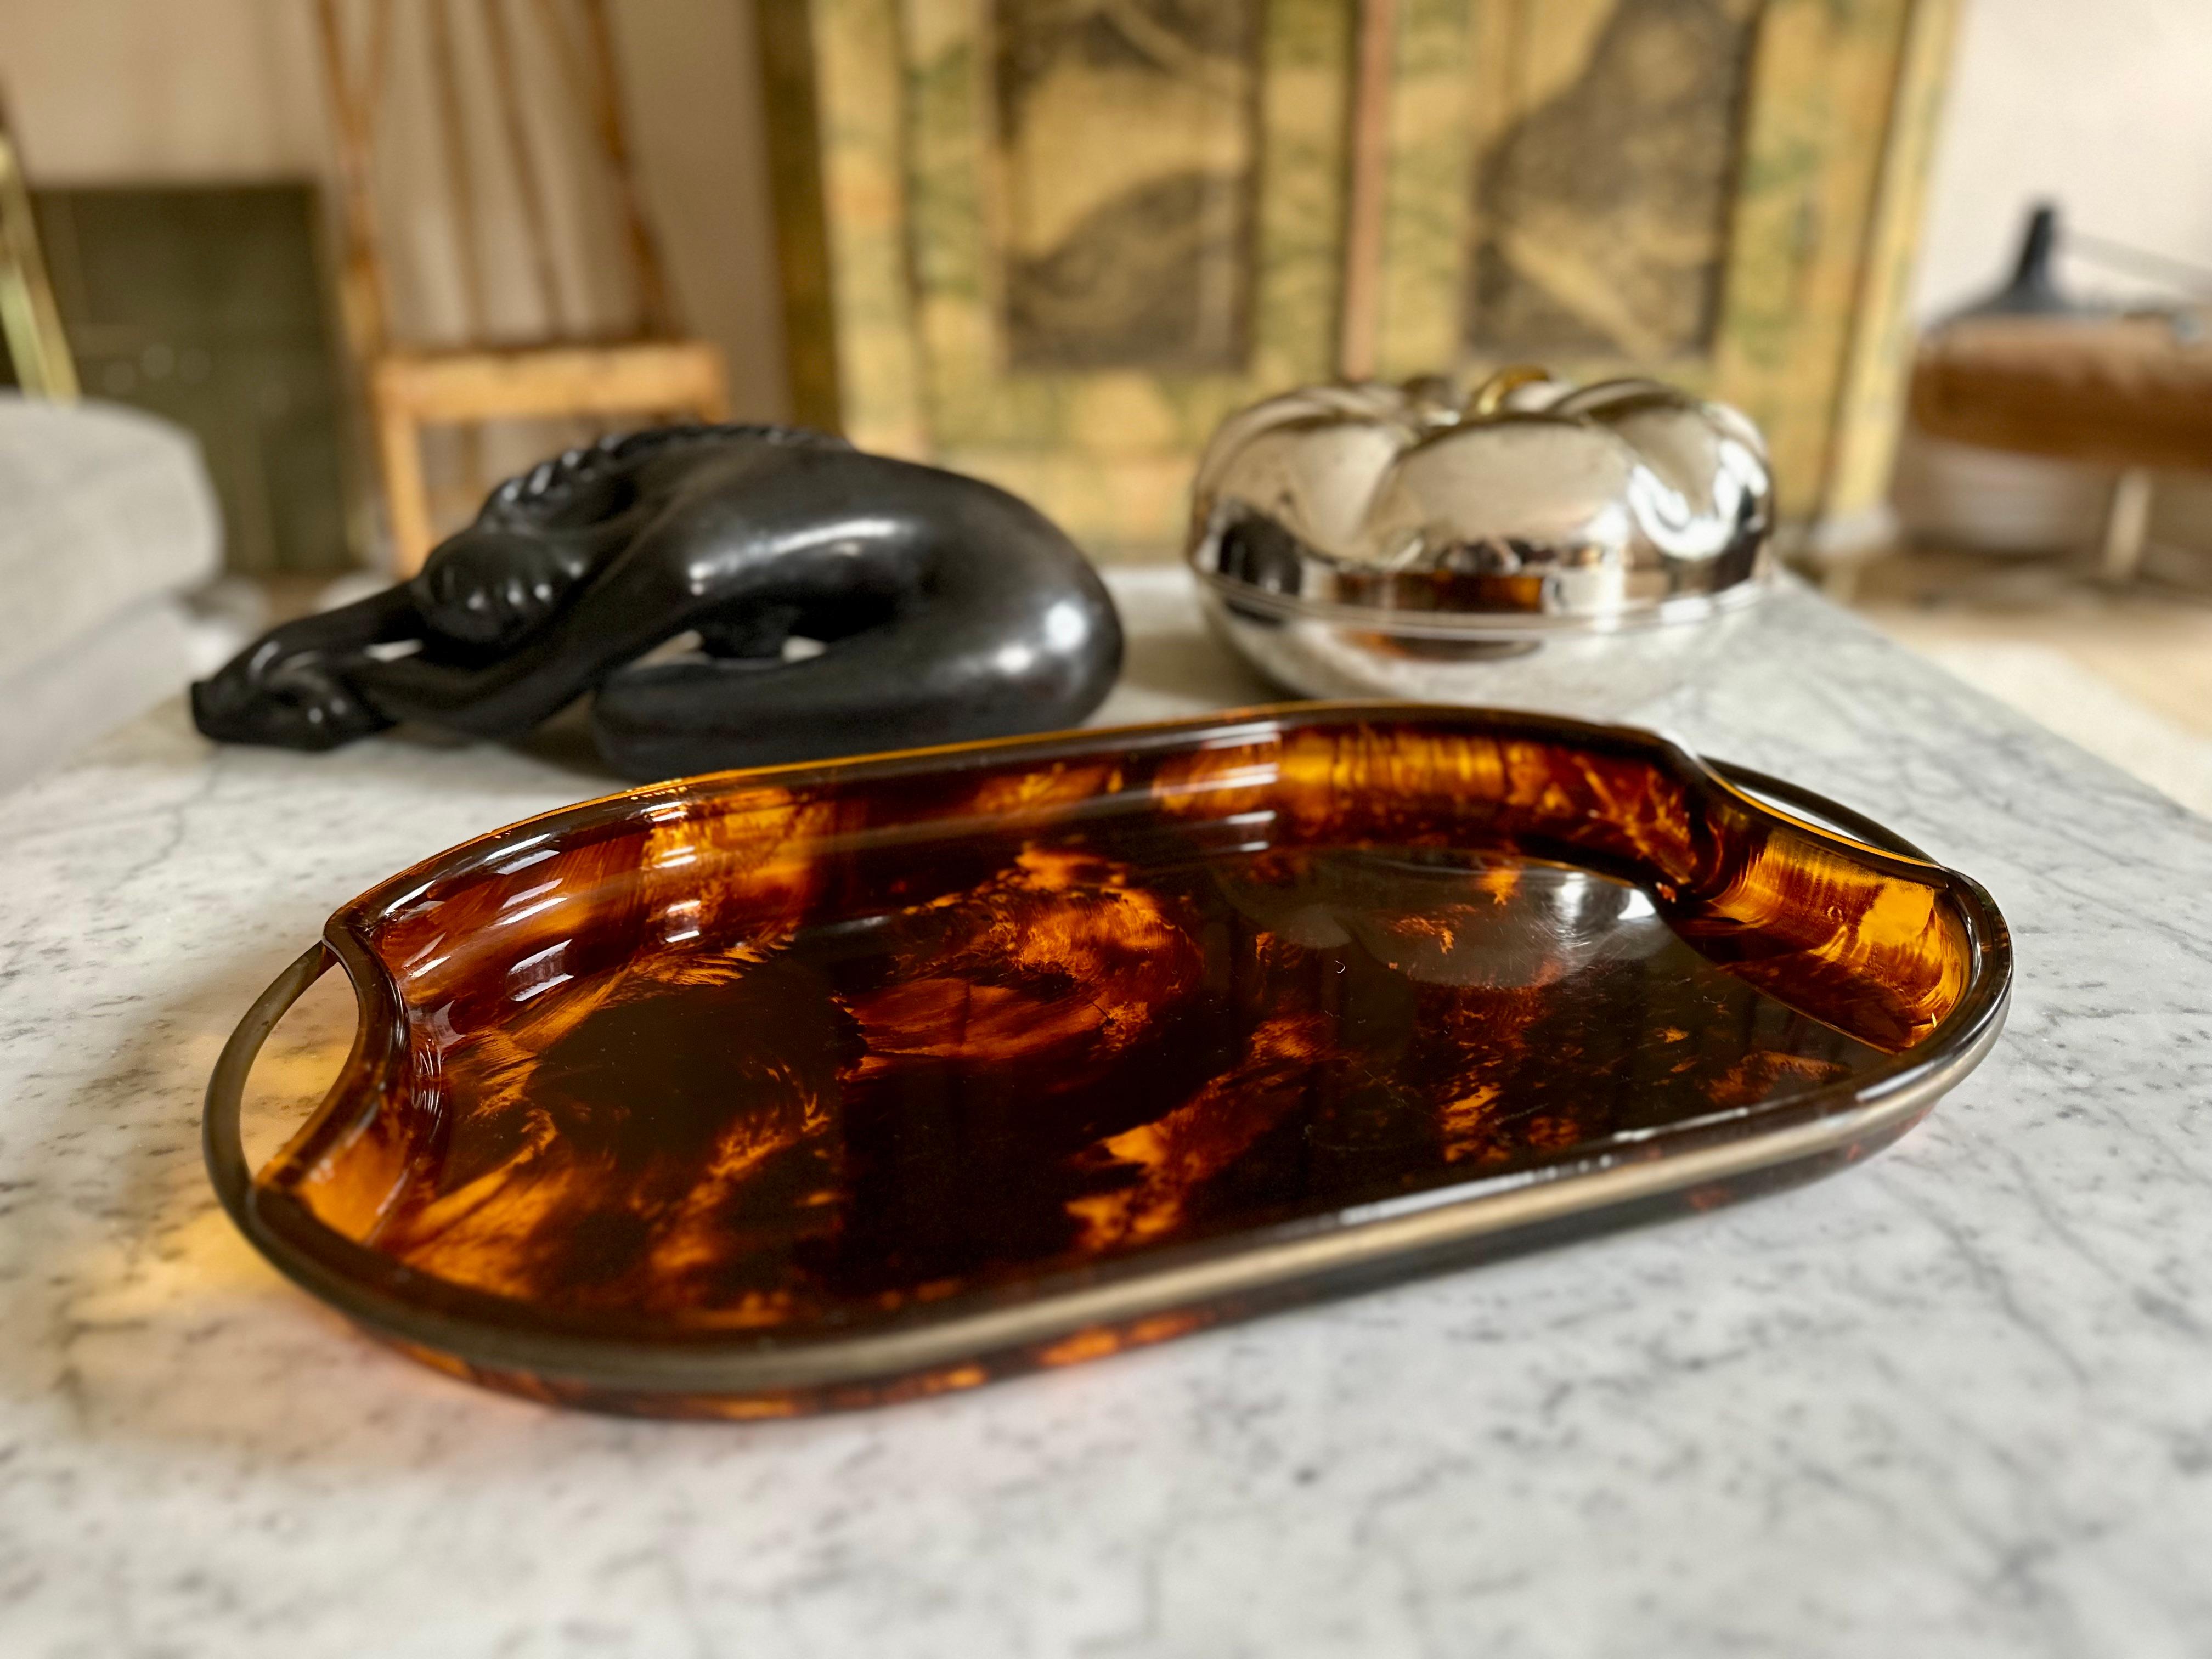  Guzzini’s Oval Lucite Serving Tray from 1970s Italy – Faux Tortoiseshell -brass For Sale 10